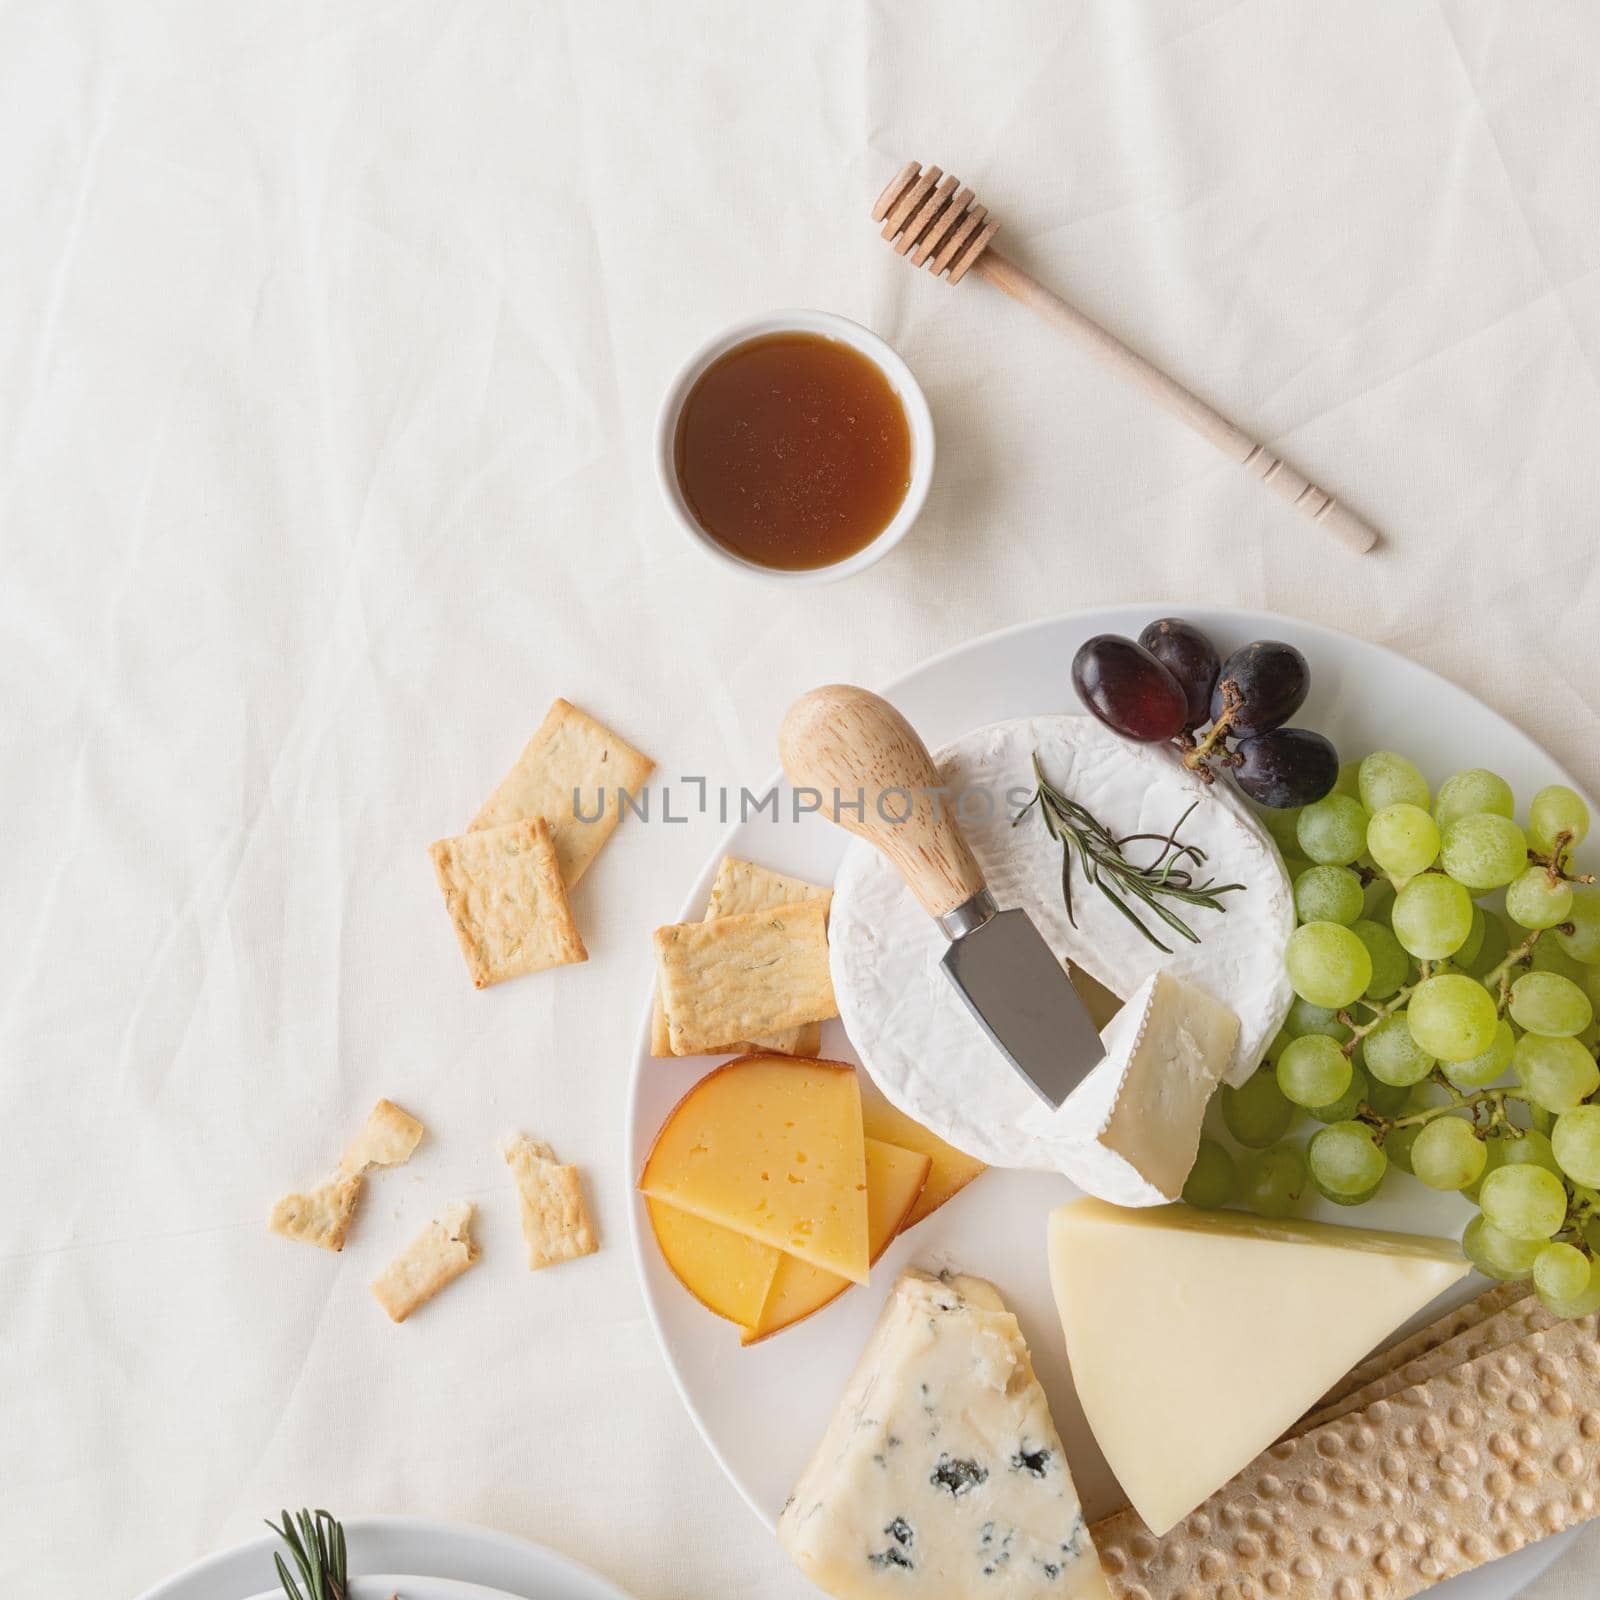 Cheese plate: Maasdam, Camembert cheese, blue cheese, bread, grapes, rosemary, honey, grapes on table